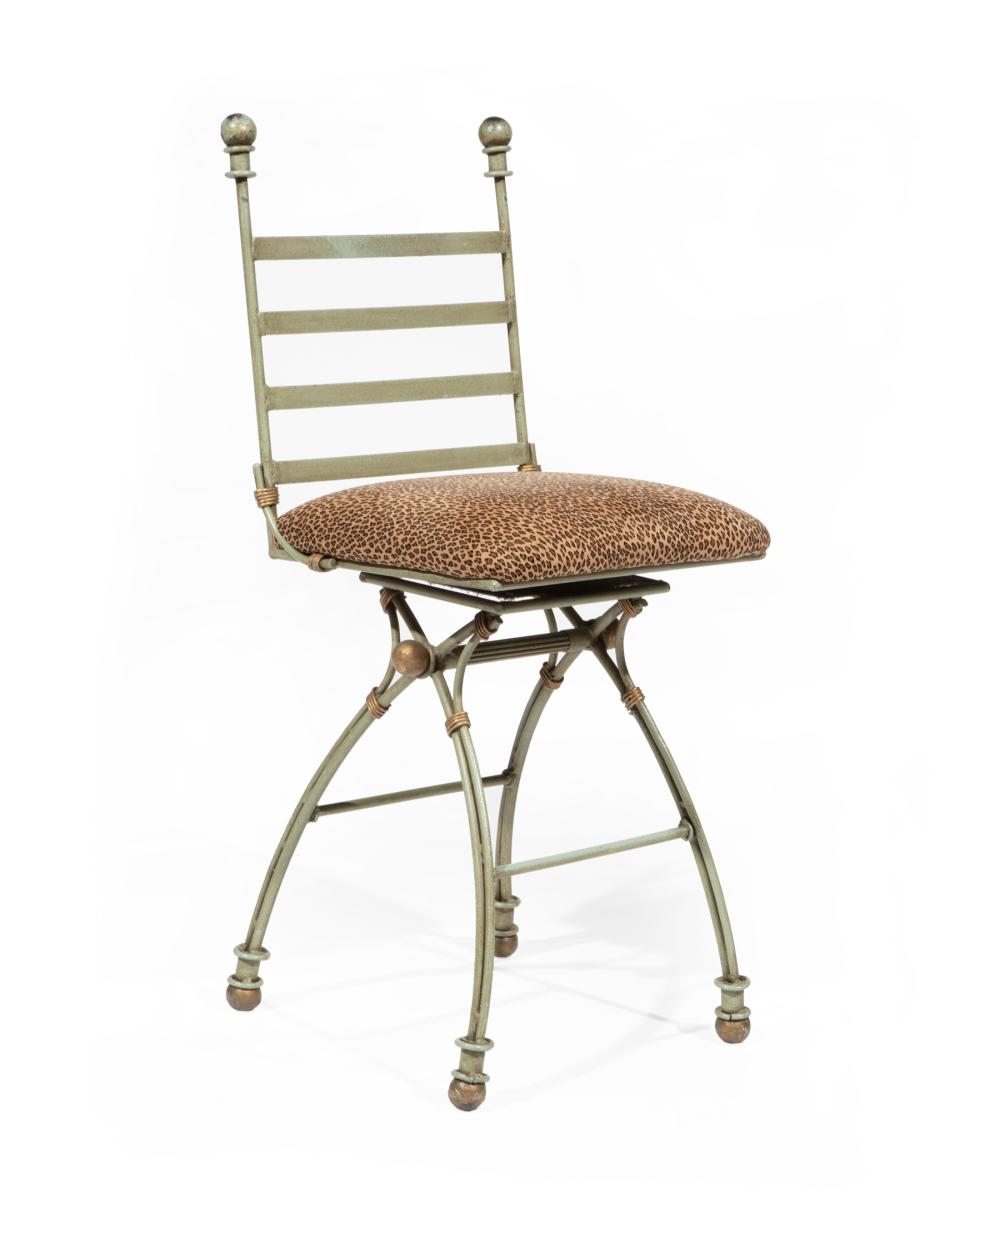 CONTEMPORARY PAINTED METAL CHAIRContemporary 3186f2